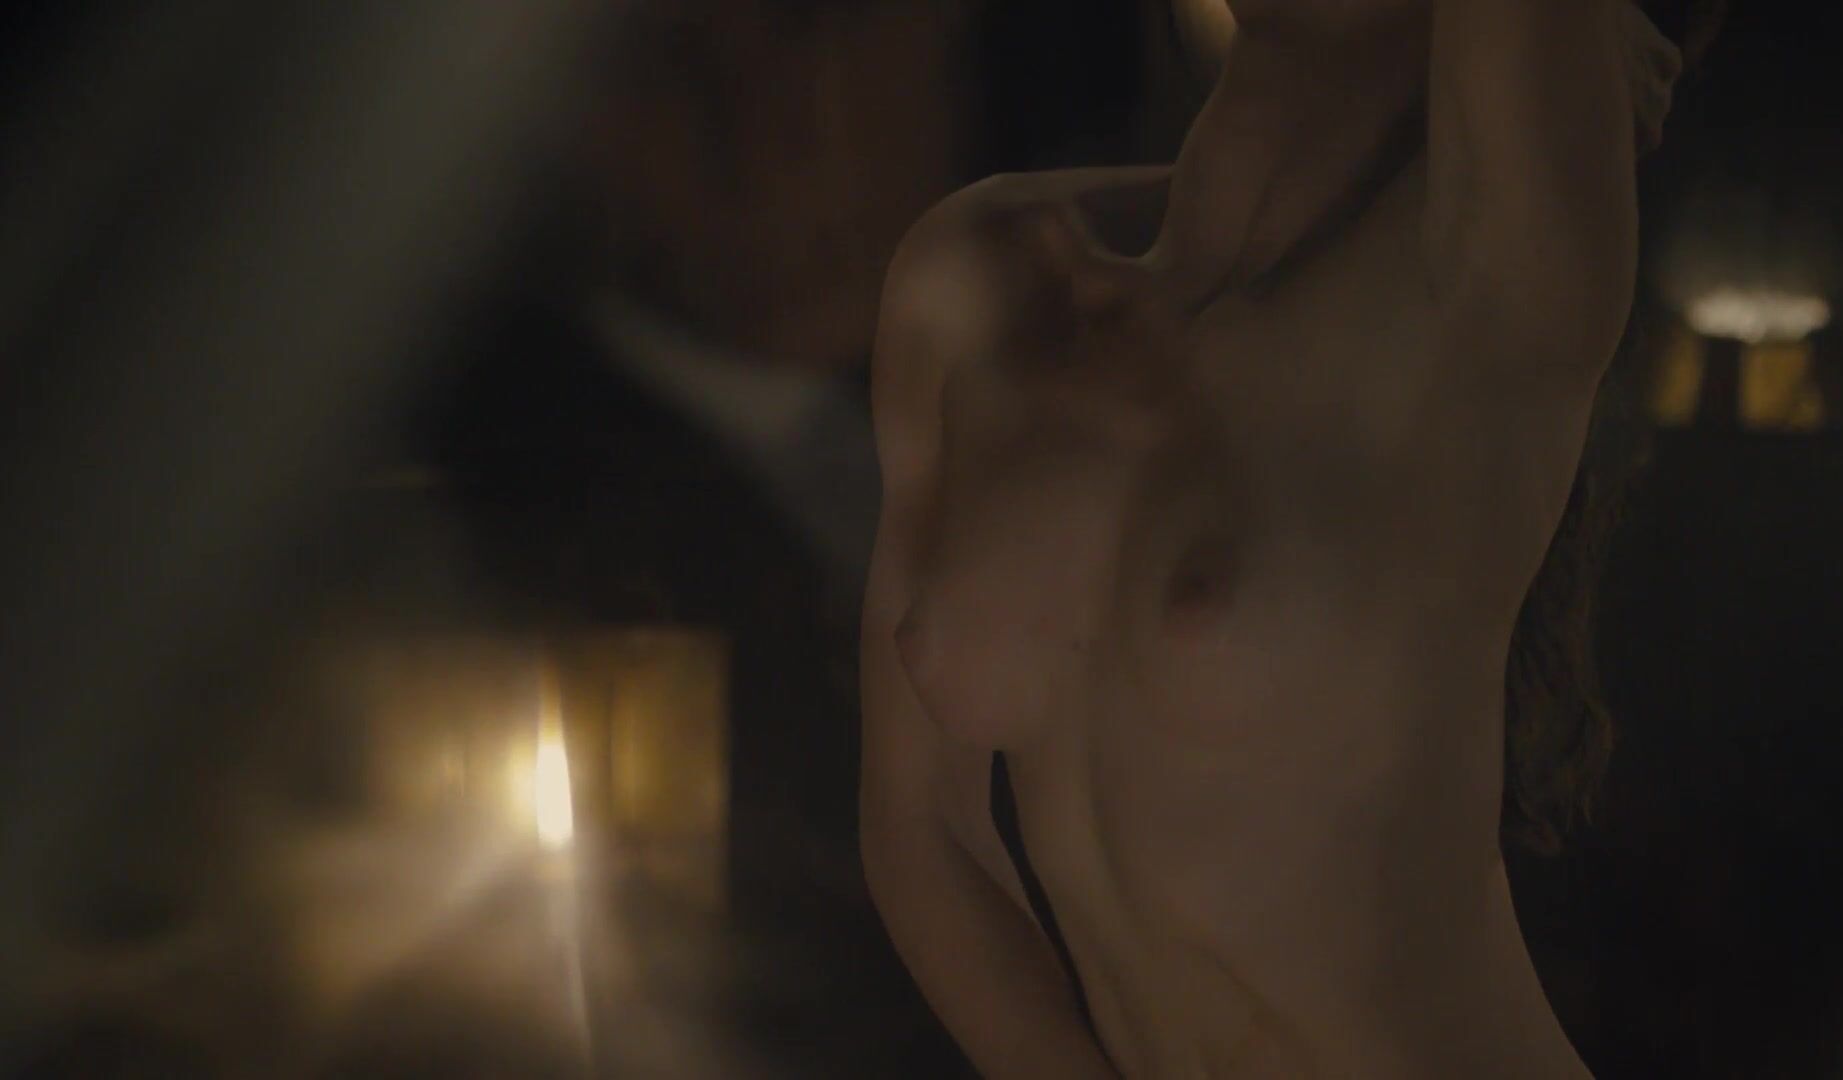 Hot Mom Director focuses on Sonya Cullingford's nice boobies showing them in The Danish Girl Pink Pussy